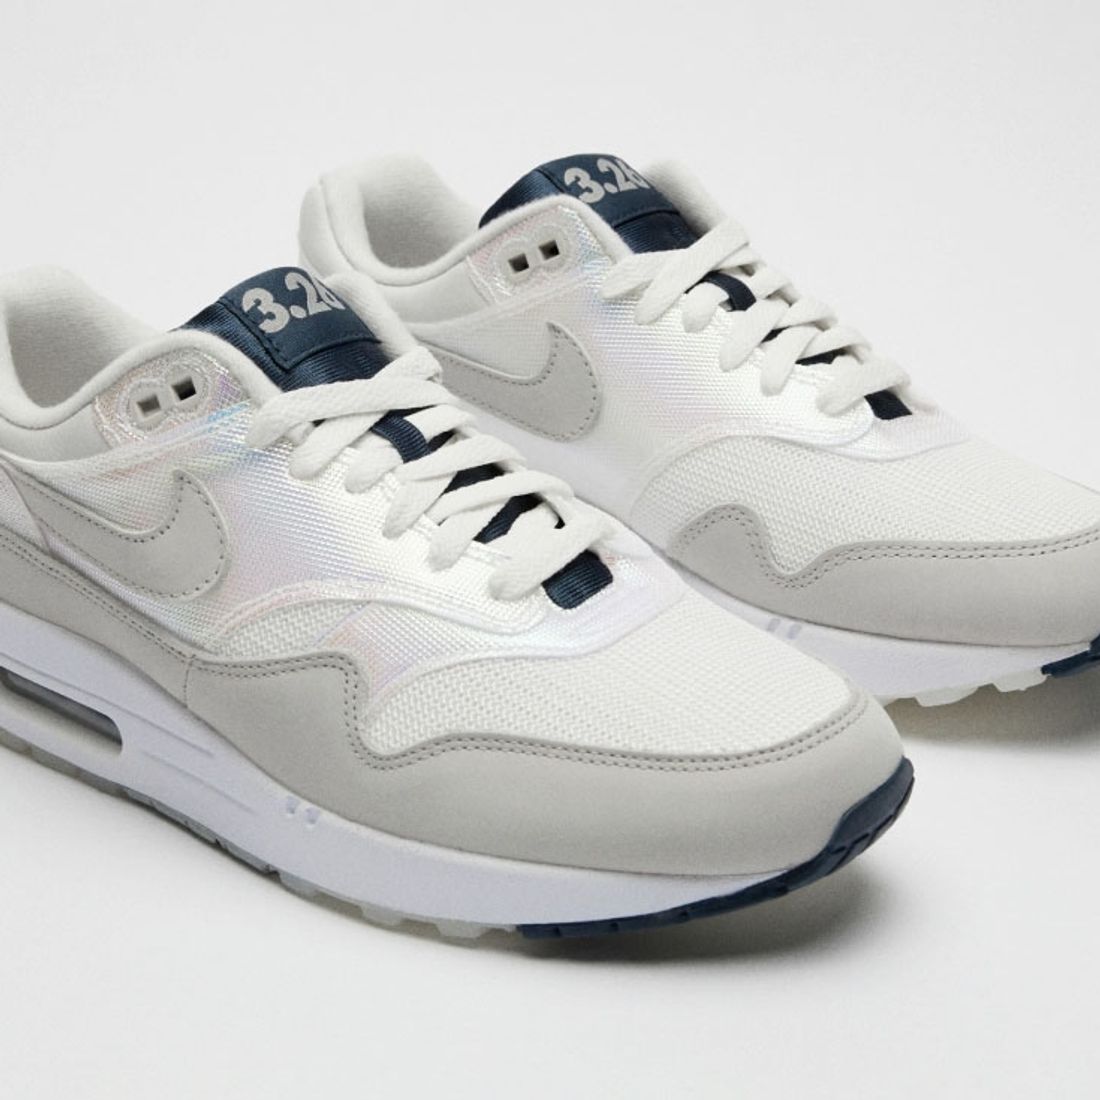 The Nike Air Max 1 La Ville Lumiere Is An European Exclusive For Air Max Day Sneaker Freaker